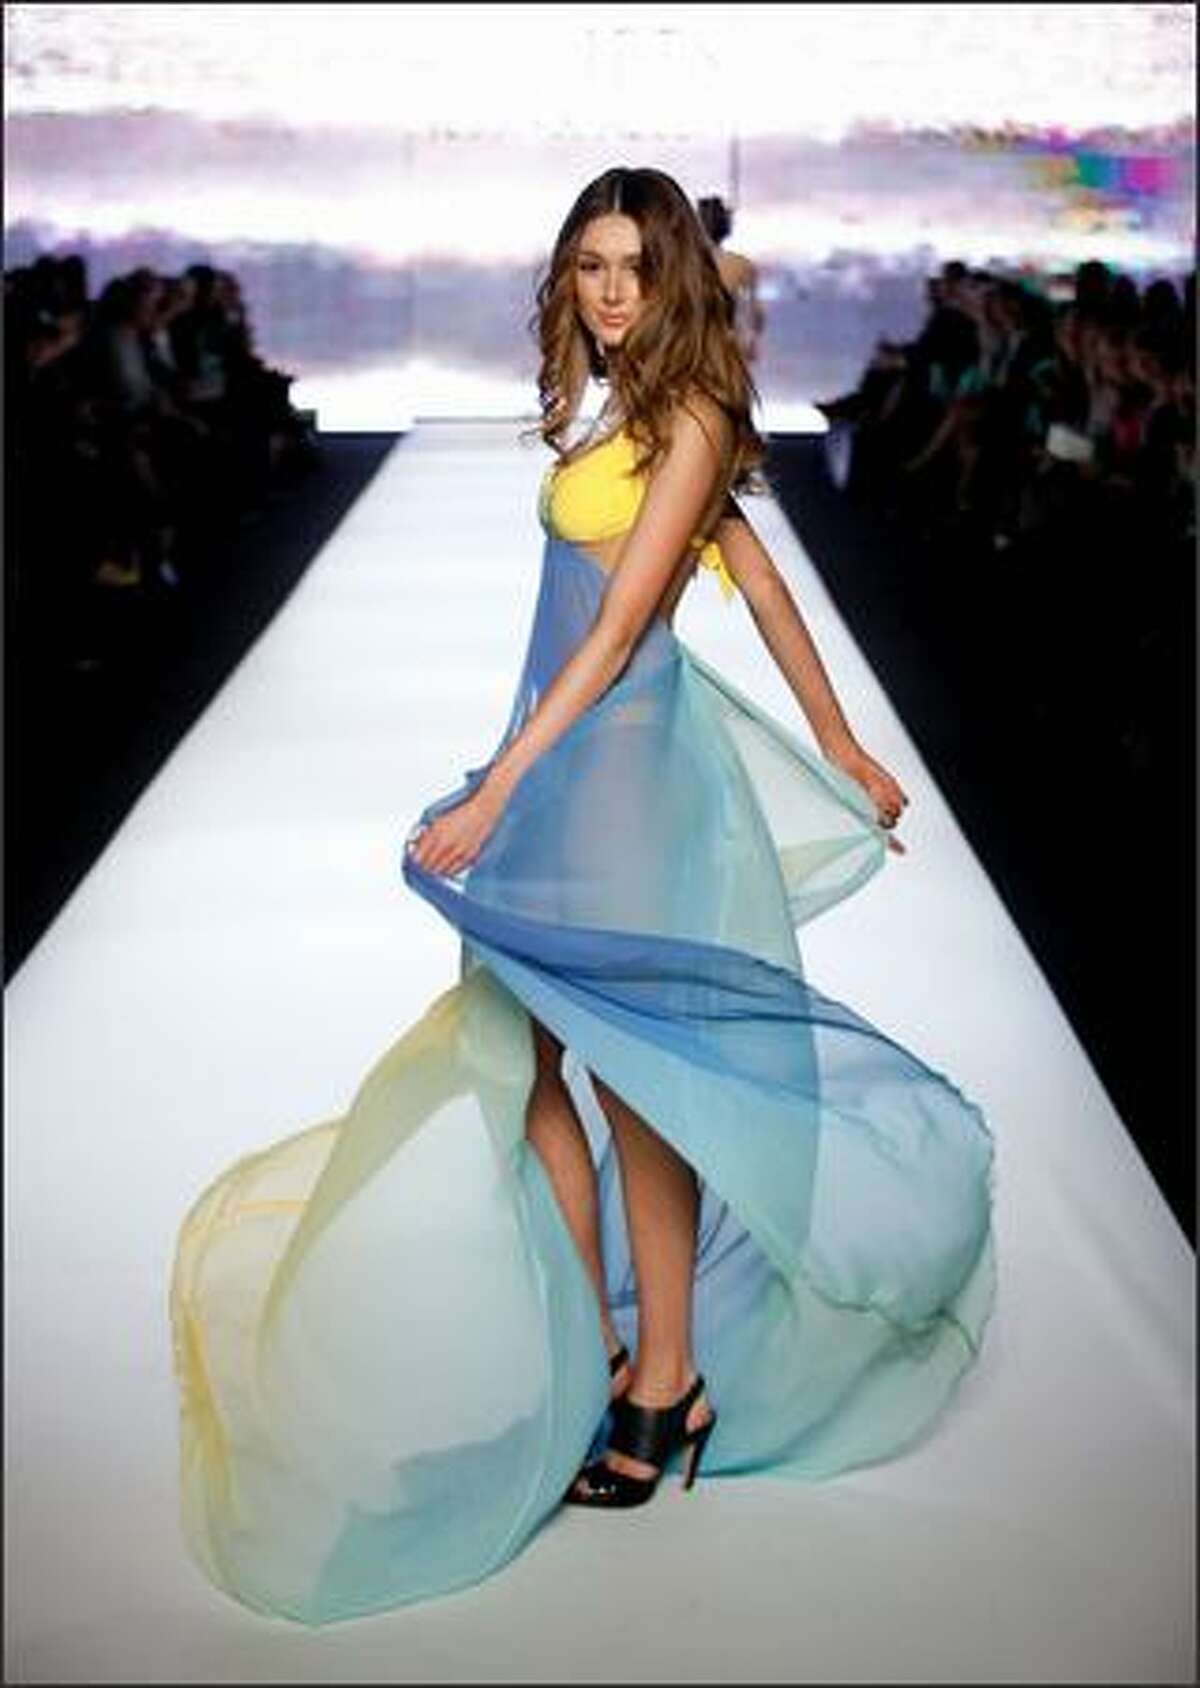 A model showcases Jets By Jessica Allen designs on the catwalk as part of the inaugural Rosemount Sydney Fashion Festival 2008 at Martin Place in Sydney, Australia.